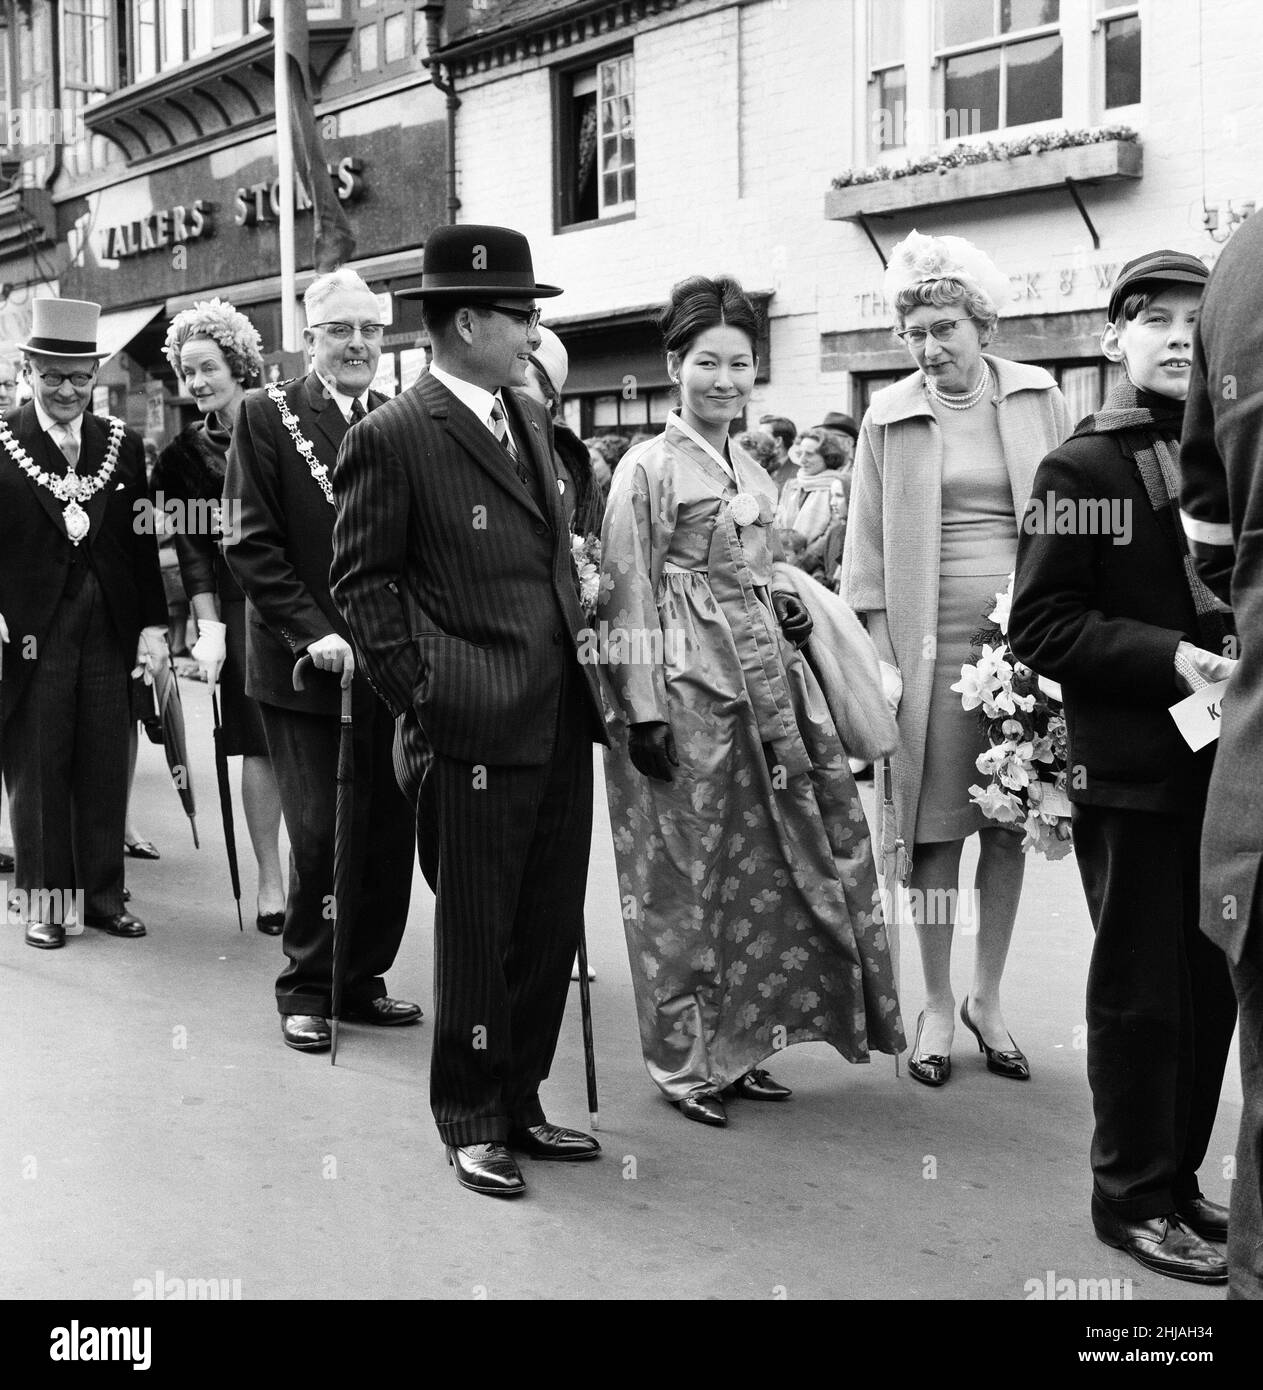 Celebrations for 400 years since the birth of William Shakespeare in Stratford-upon-Avon.  The procession takes place. 23rd April 1964. Stock Photo